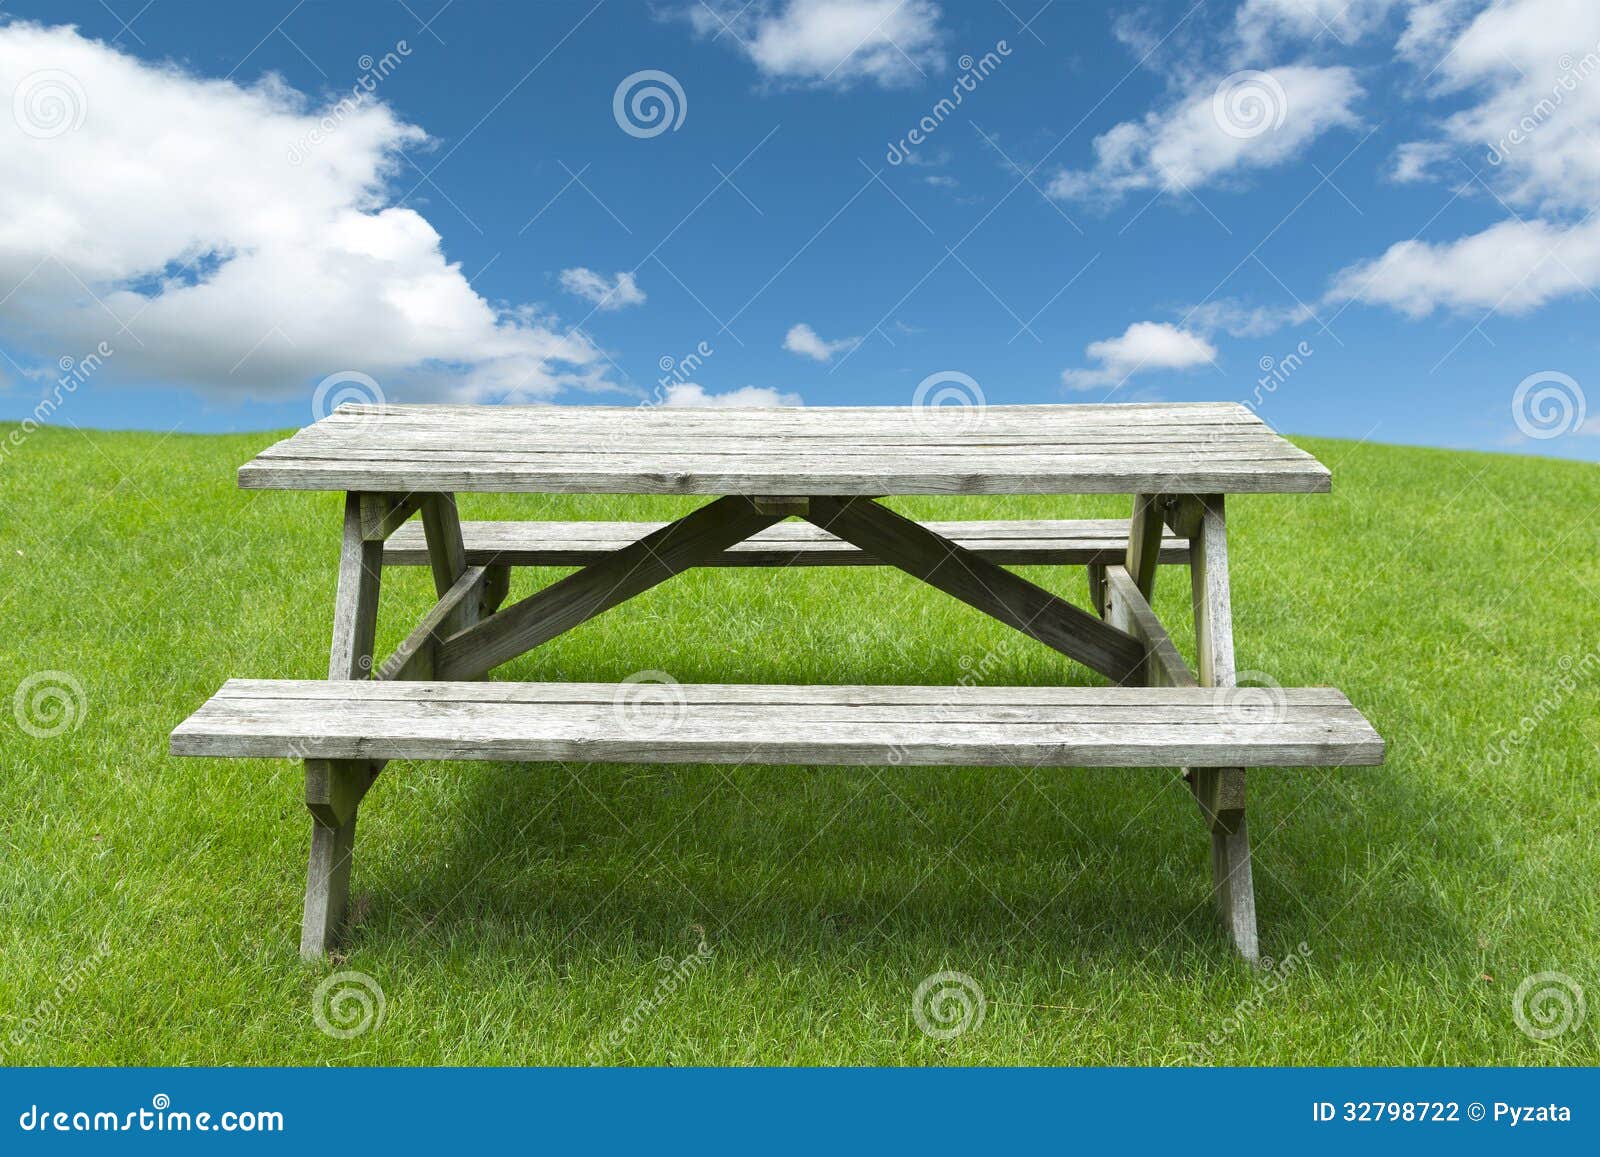 Picnic Table Stock Photography - Image: 32798722